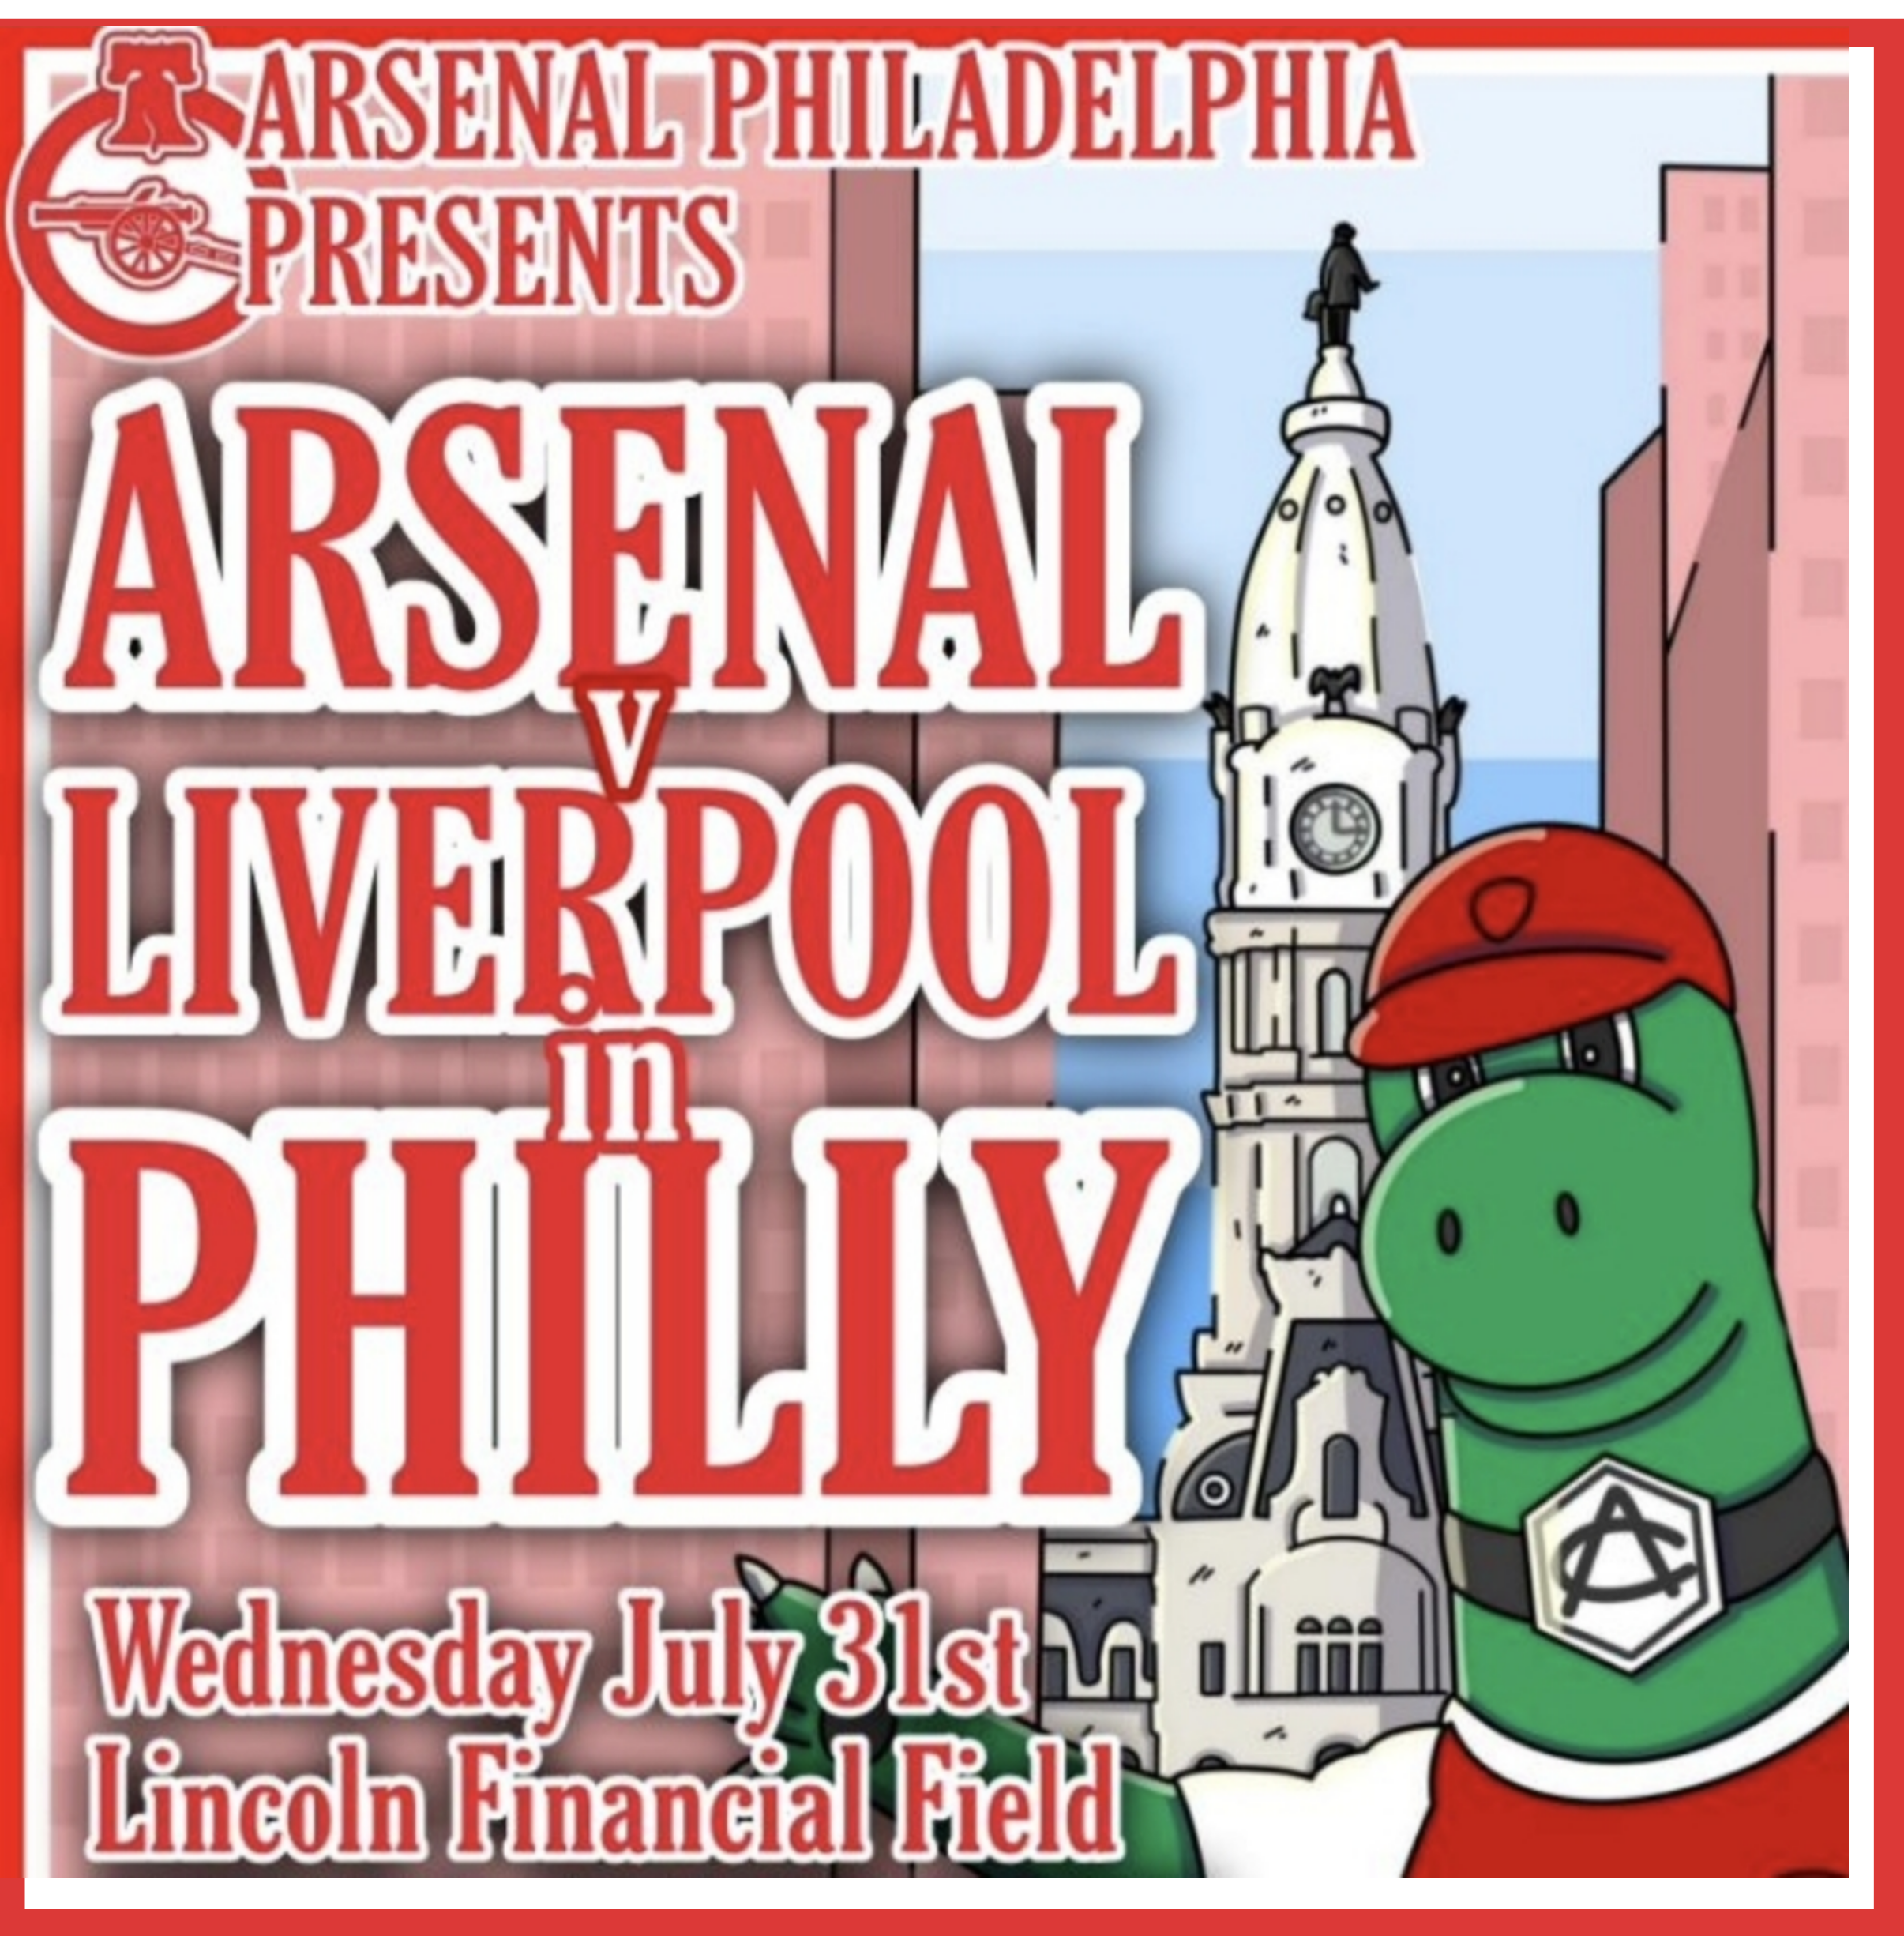 WAITING LIST for Match TicketsArsenal v Liverpool at Lincoln Financial Field July 31 7:30pm